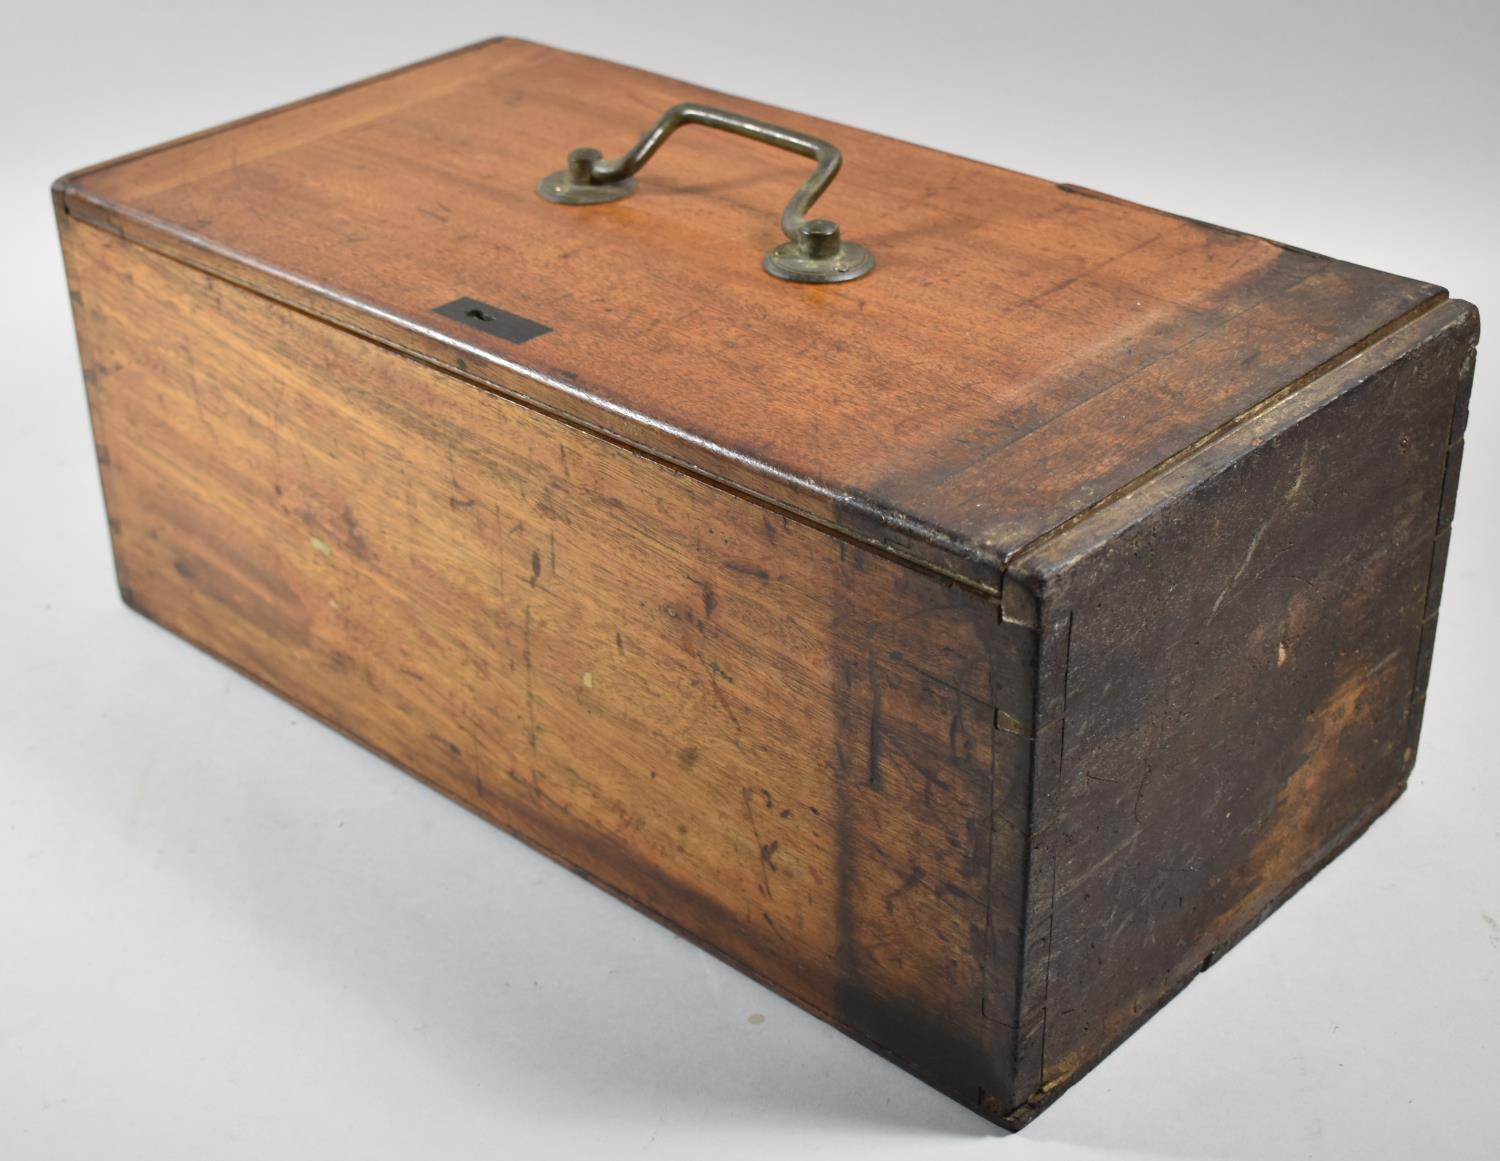 A Late 19th Century Hinged Lidded Box with Top Brass Handle and Lock Escutcheon, 44x22x18cms High